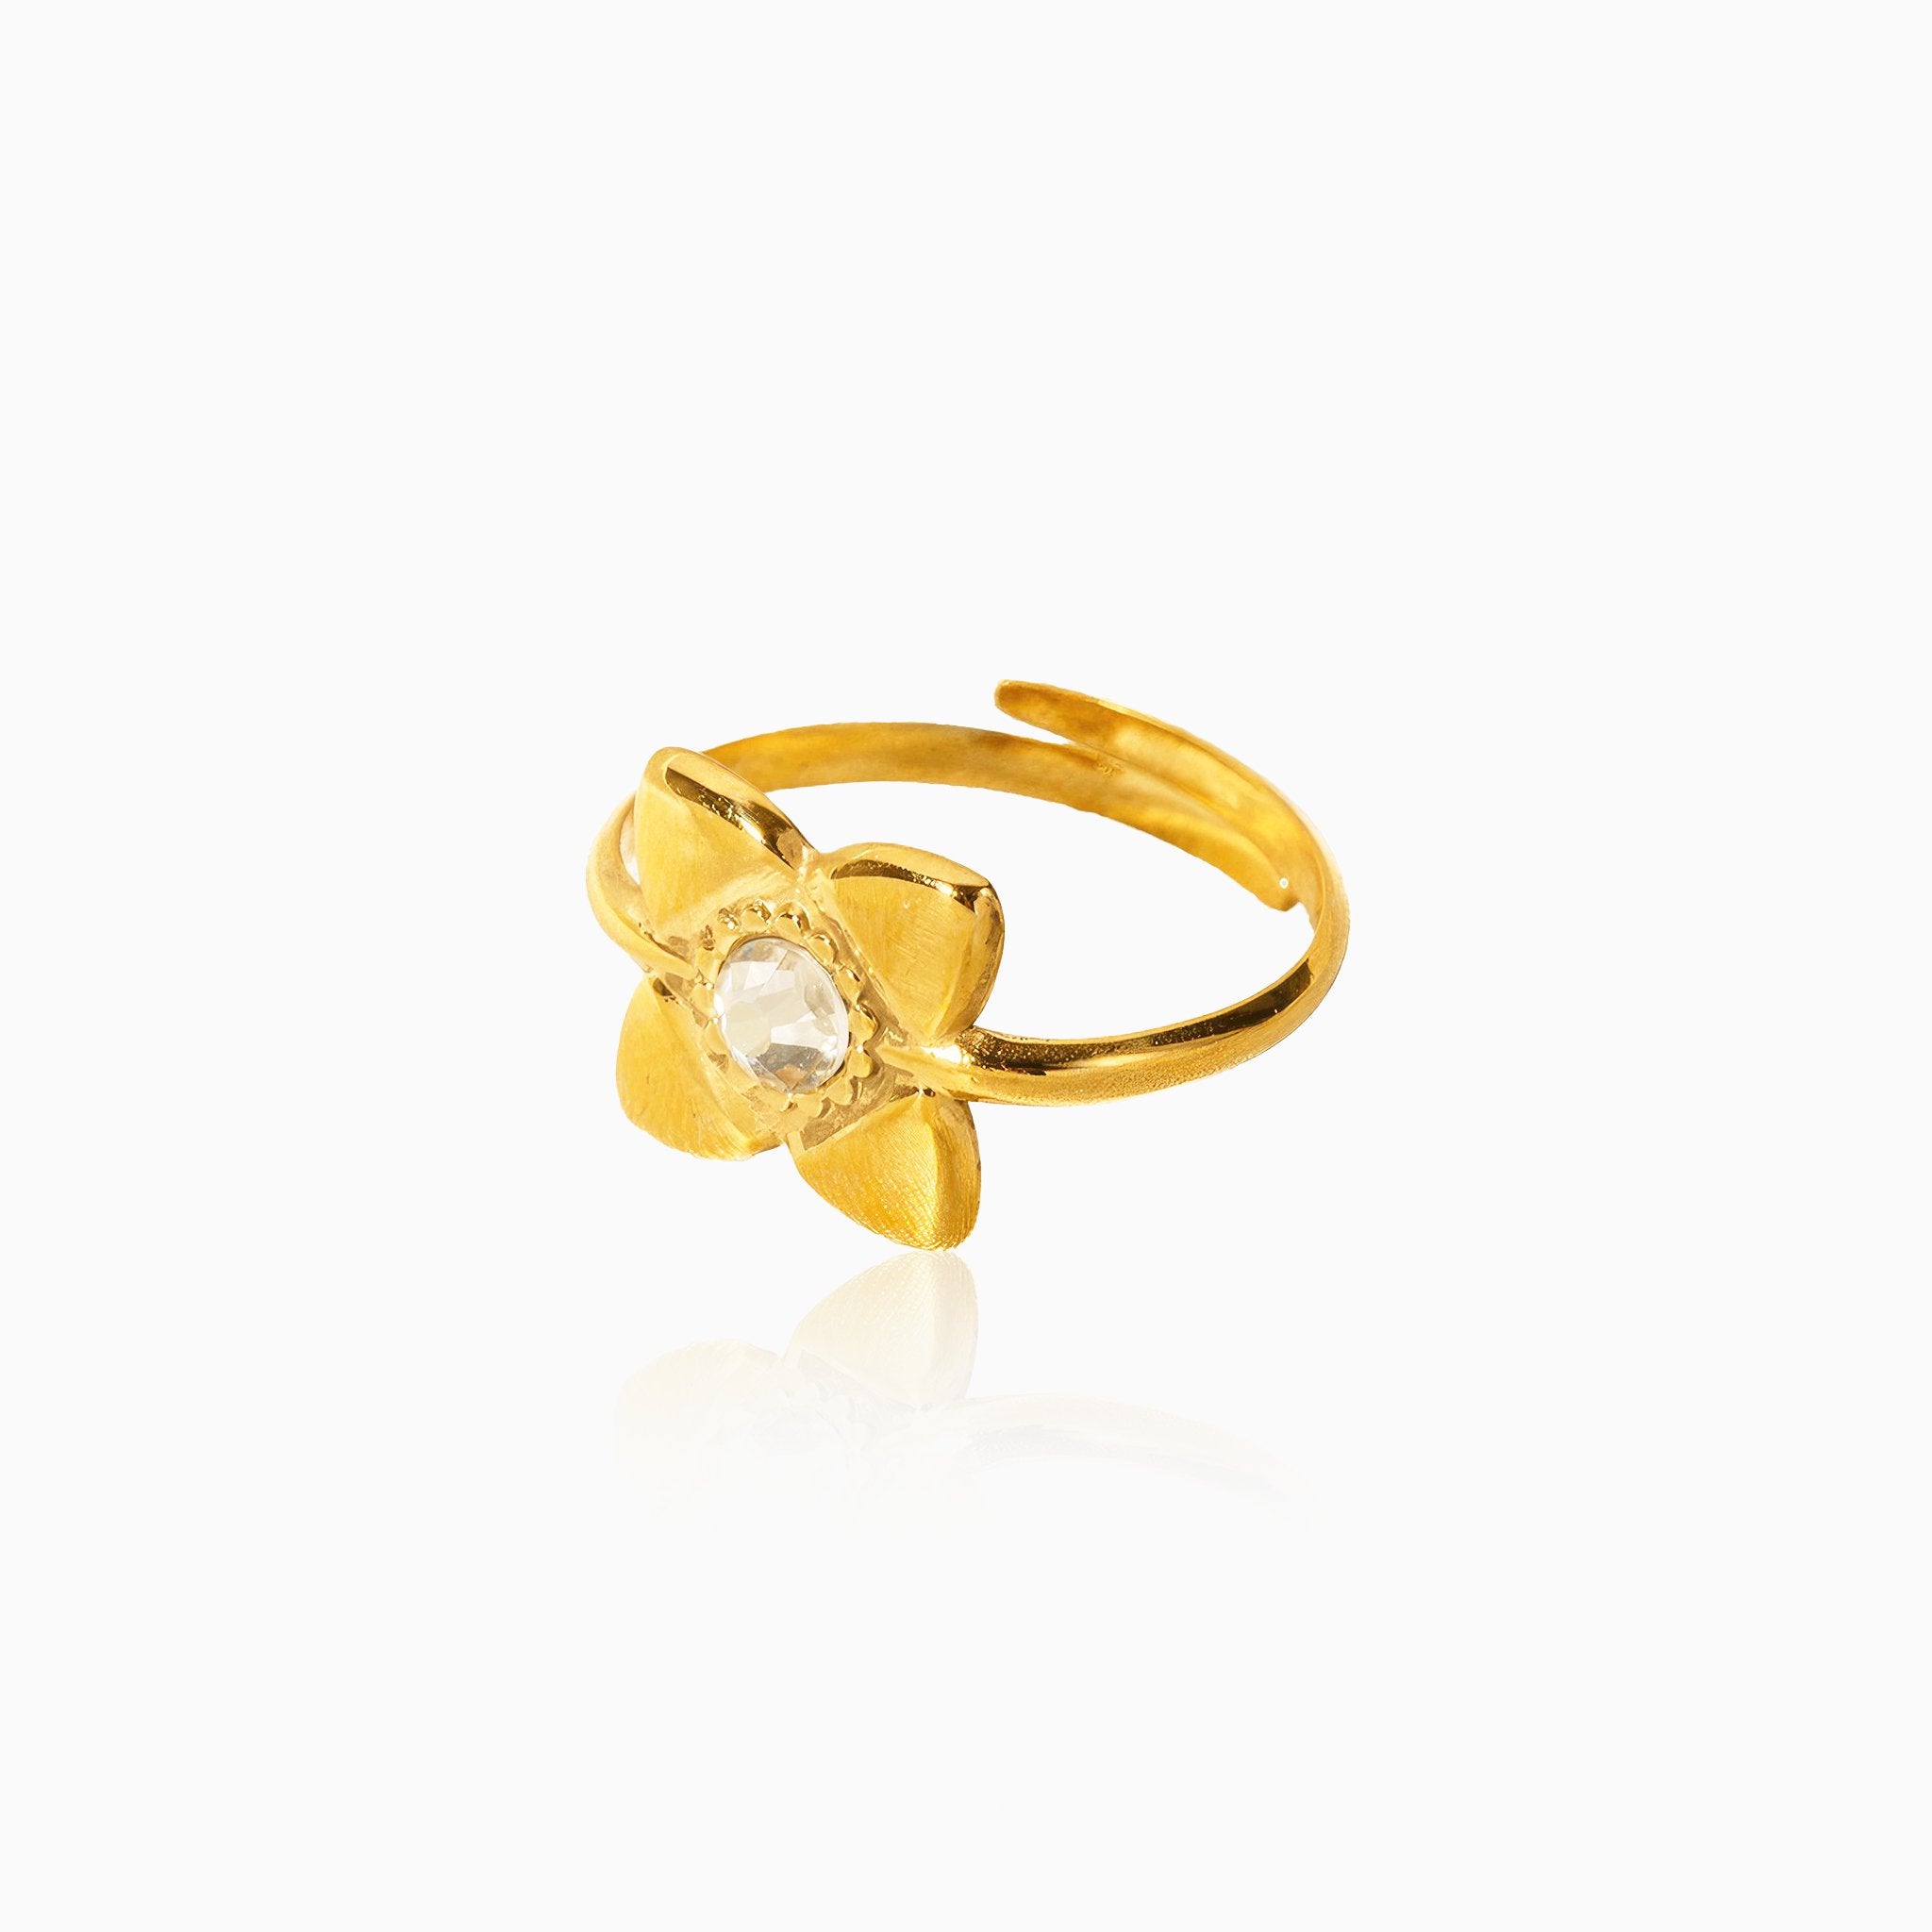 Flower Open Design Ring - Nobbier - Ring - 18K Gold And Titanium PVD Coated Jewelry